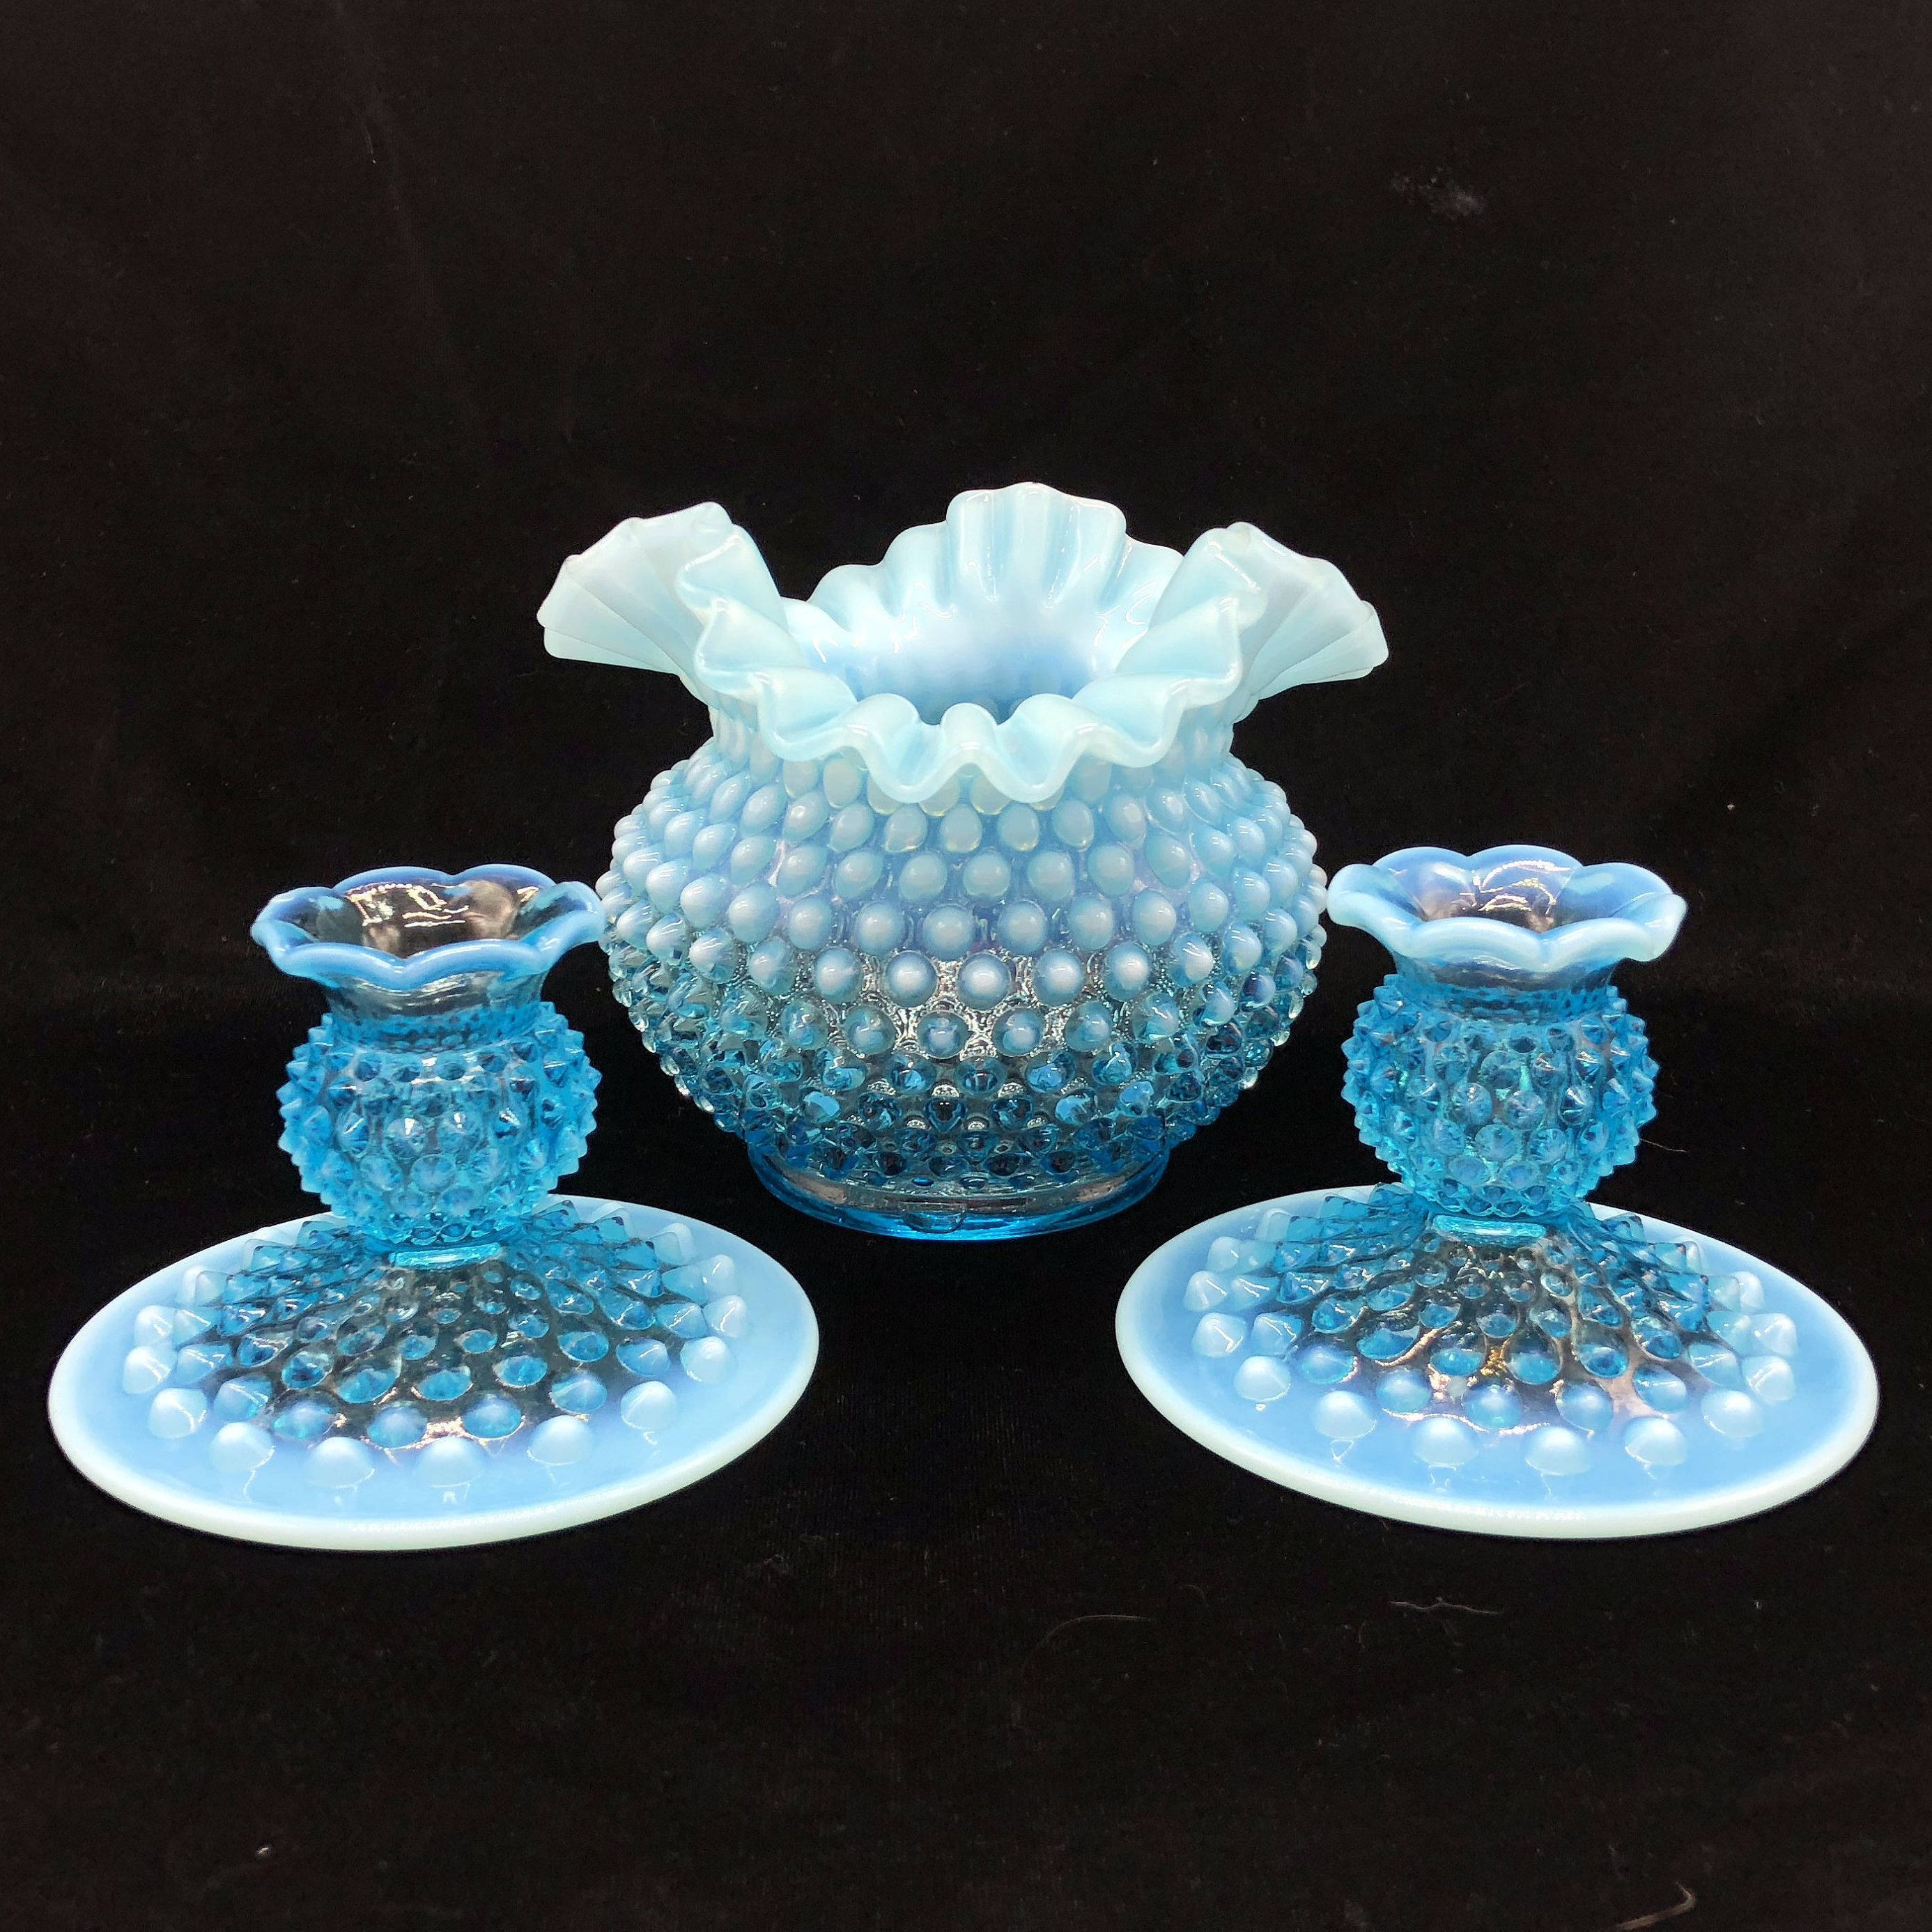 12 Unique Multi Colored Glass Vases 2024 free download multi colored glass vases of 37 fenton blue glass vase the weekly world regarding fenton hobnail glass centerpiece set blue opalescent vase candle